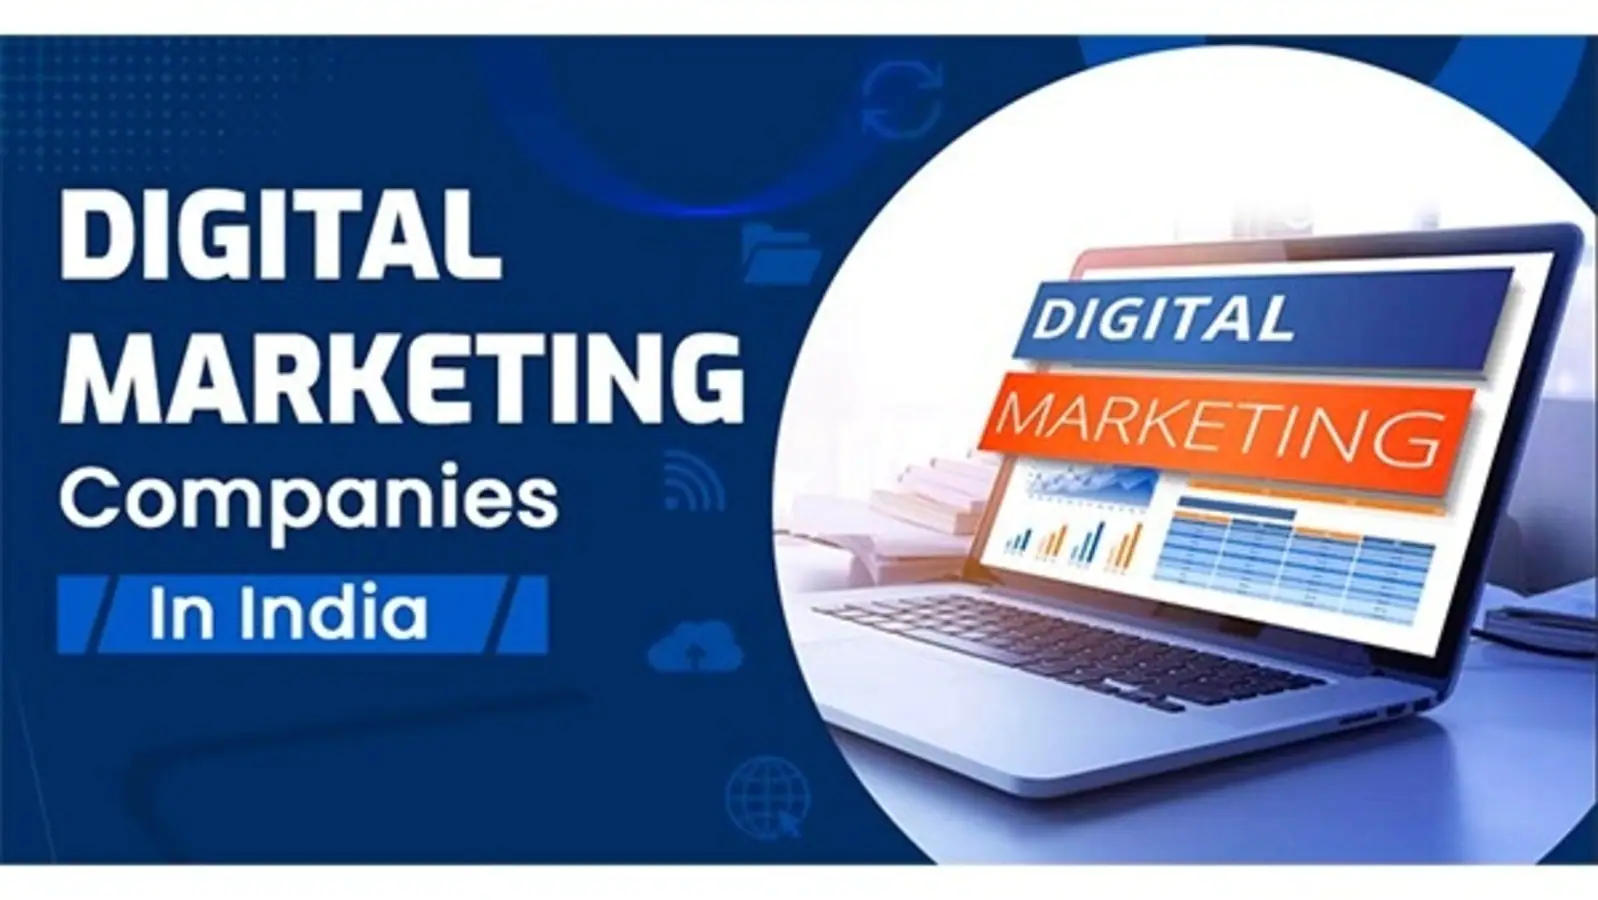  Elevate Your Business” With Digital Marketing Company in Delhi”